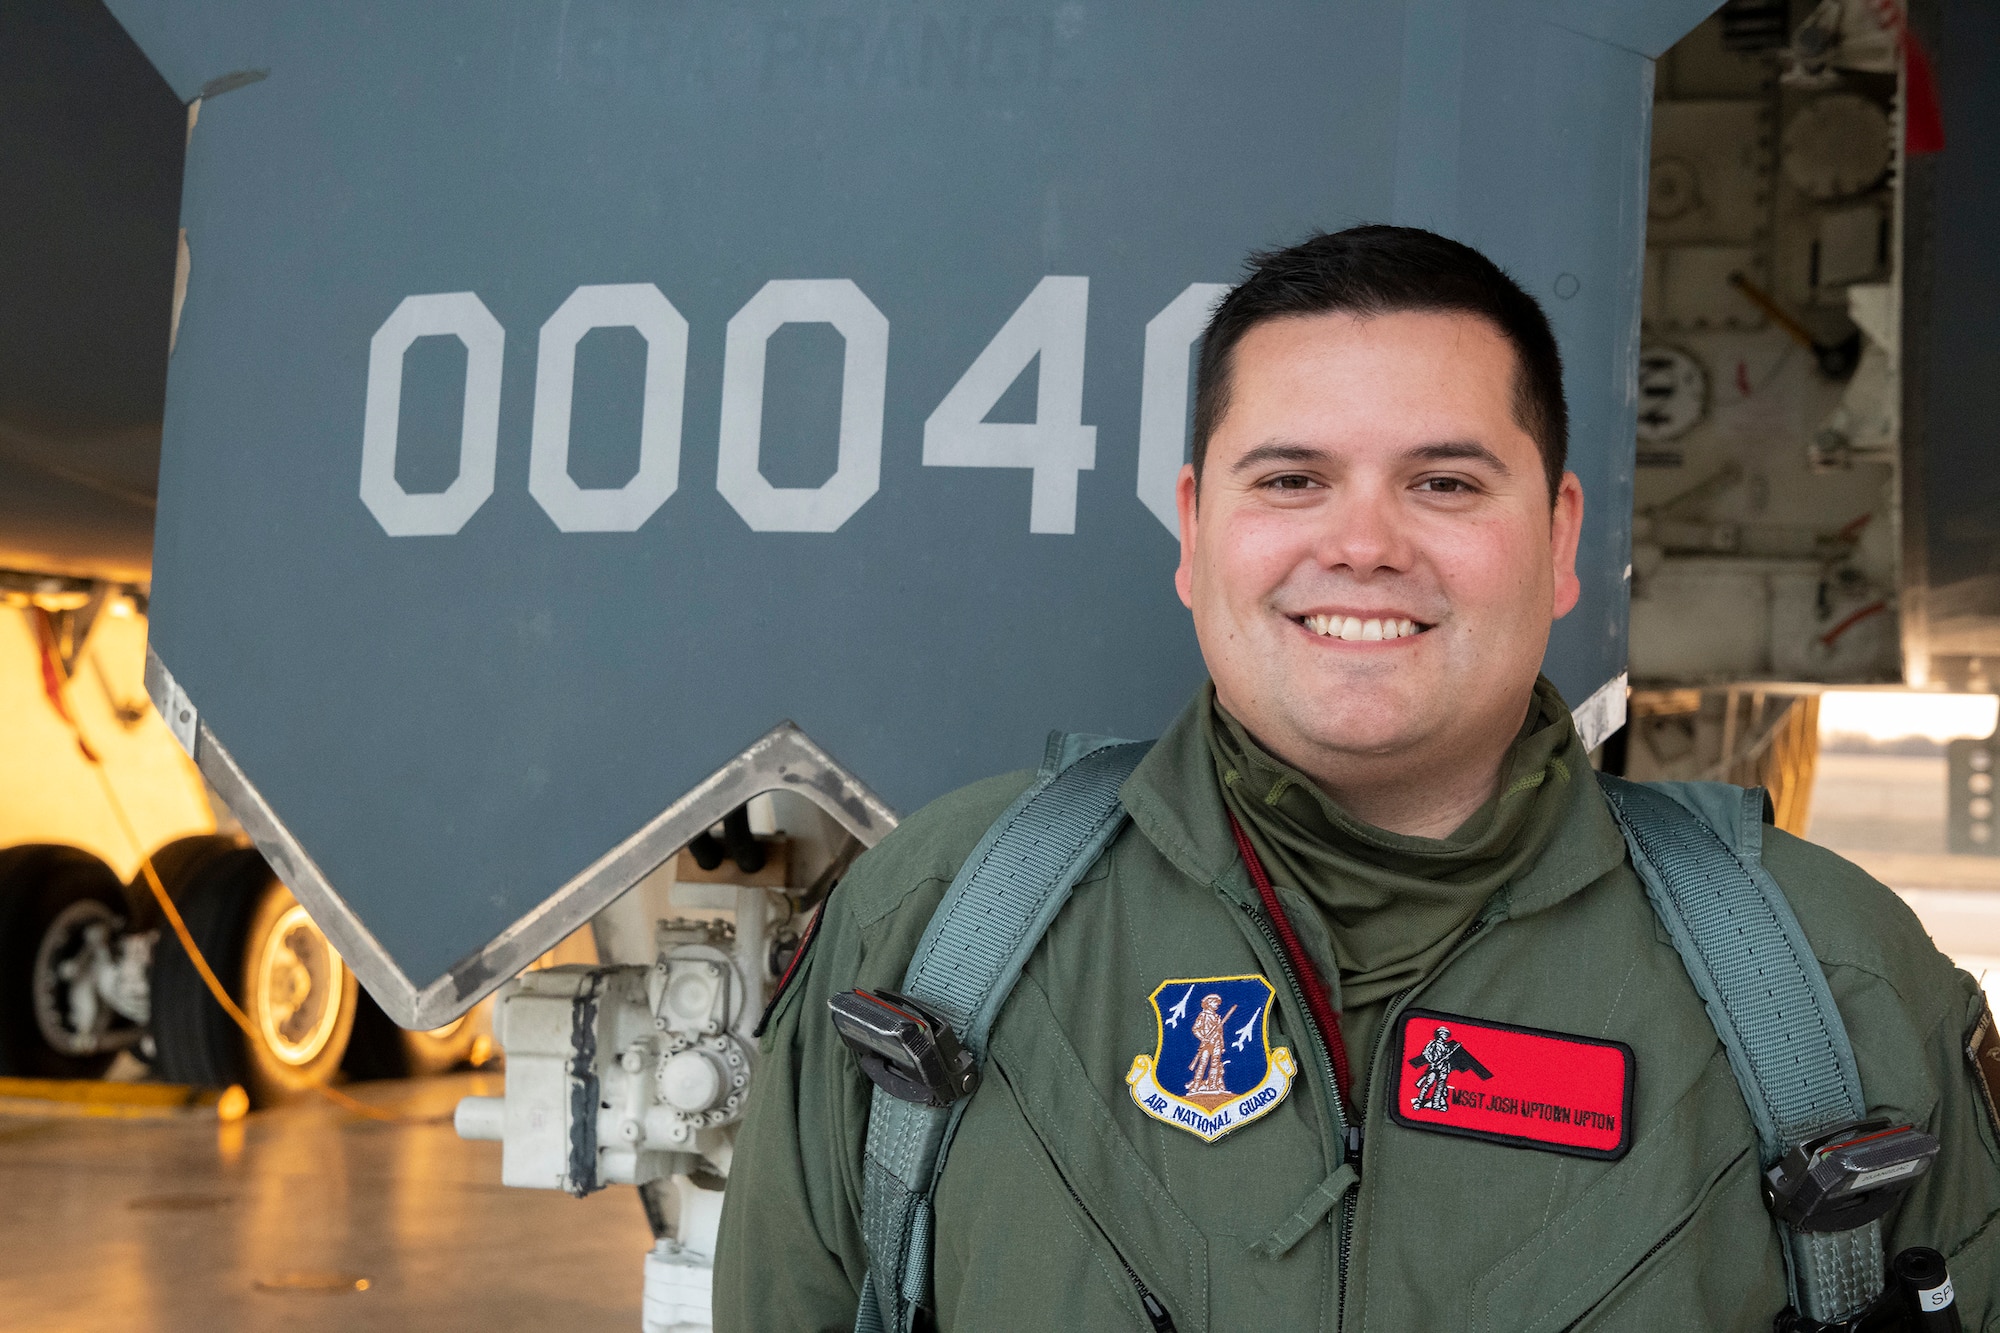 Master Sgt. Joshua Upton, the 131st Bomb Wing's Maintainer of the Year, poses for a photo before an incentive flight in a B-2 Spirit stealth bomber, Jan. 27, 2022, at Whiteman Air Force Base, Missouri. As a dedicated crew chief for Spirit 88-0329, Upton took primary responsibility for ensuring the aircraft was ready to conduct operations anytime, anywhere. (U.S. Air National Guard photo, 131st Bomb Wing Public Affairs)